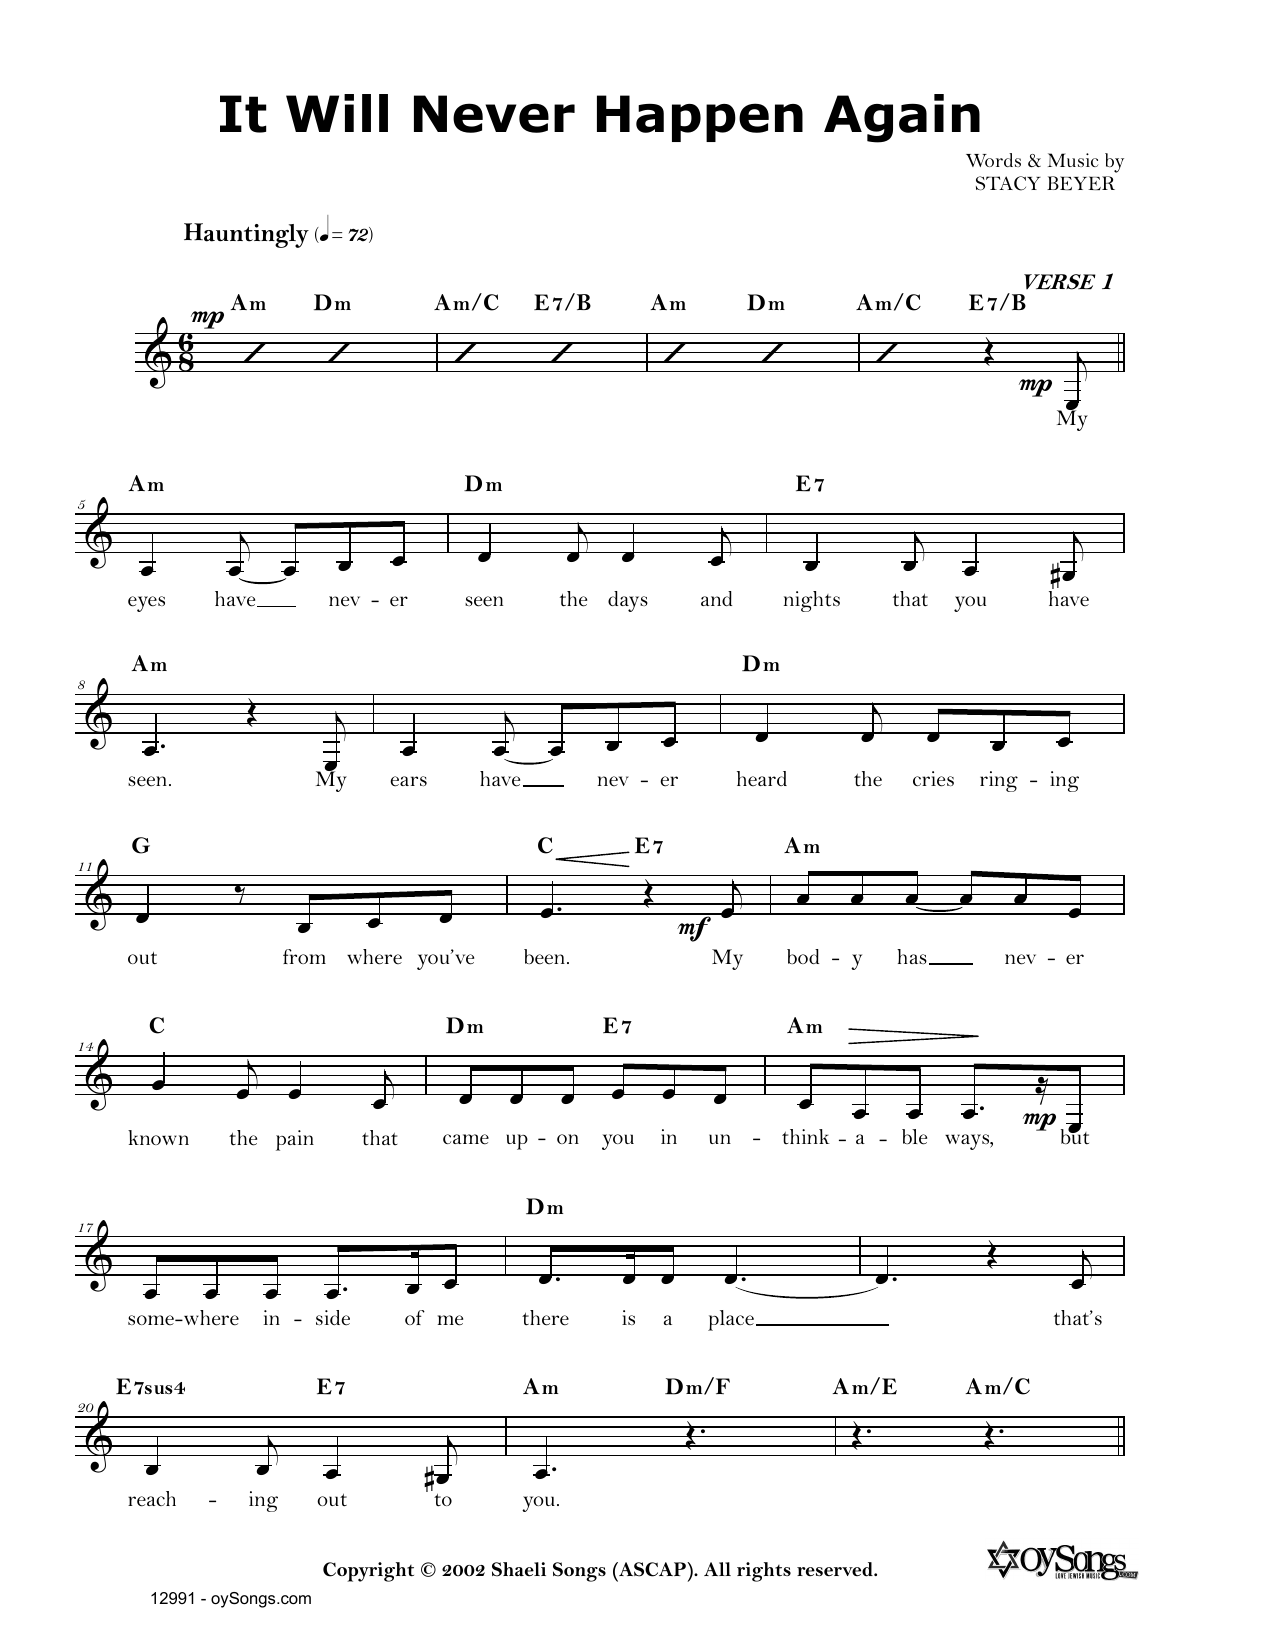 Download Stacy Beyer It Will Never Happen Again Sheet Music